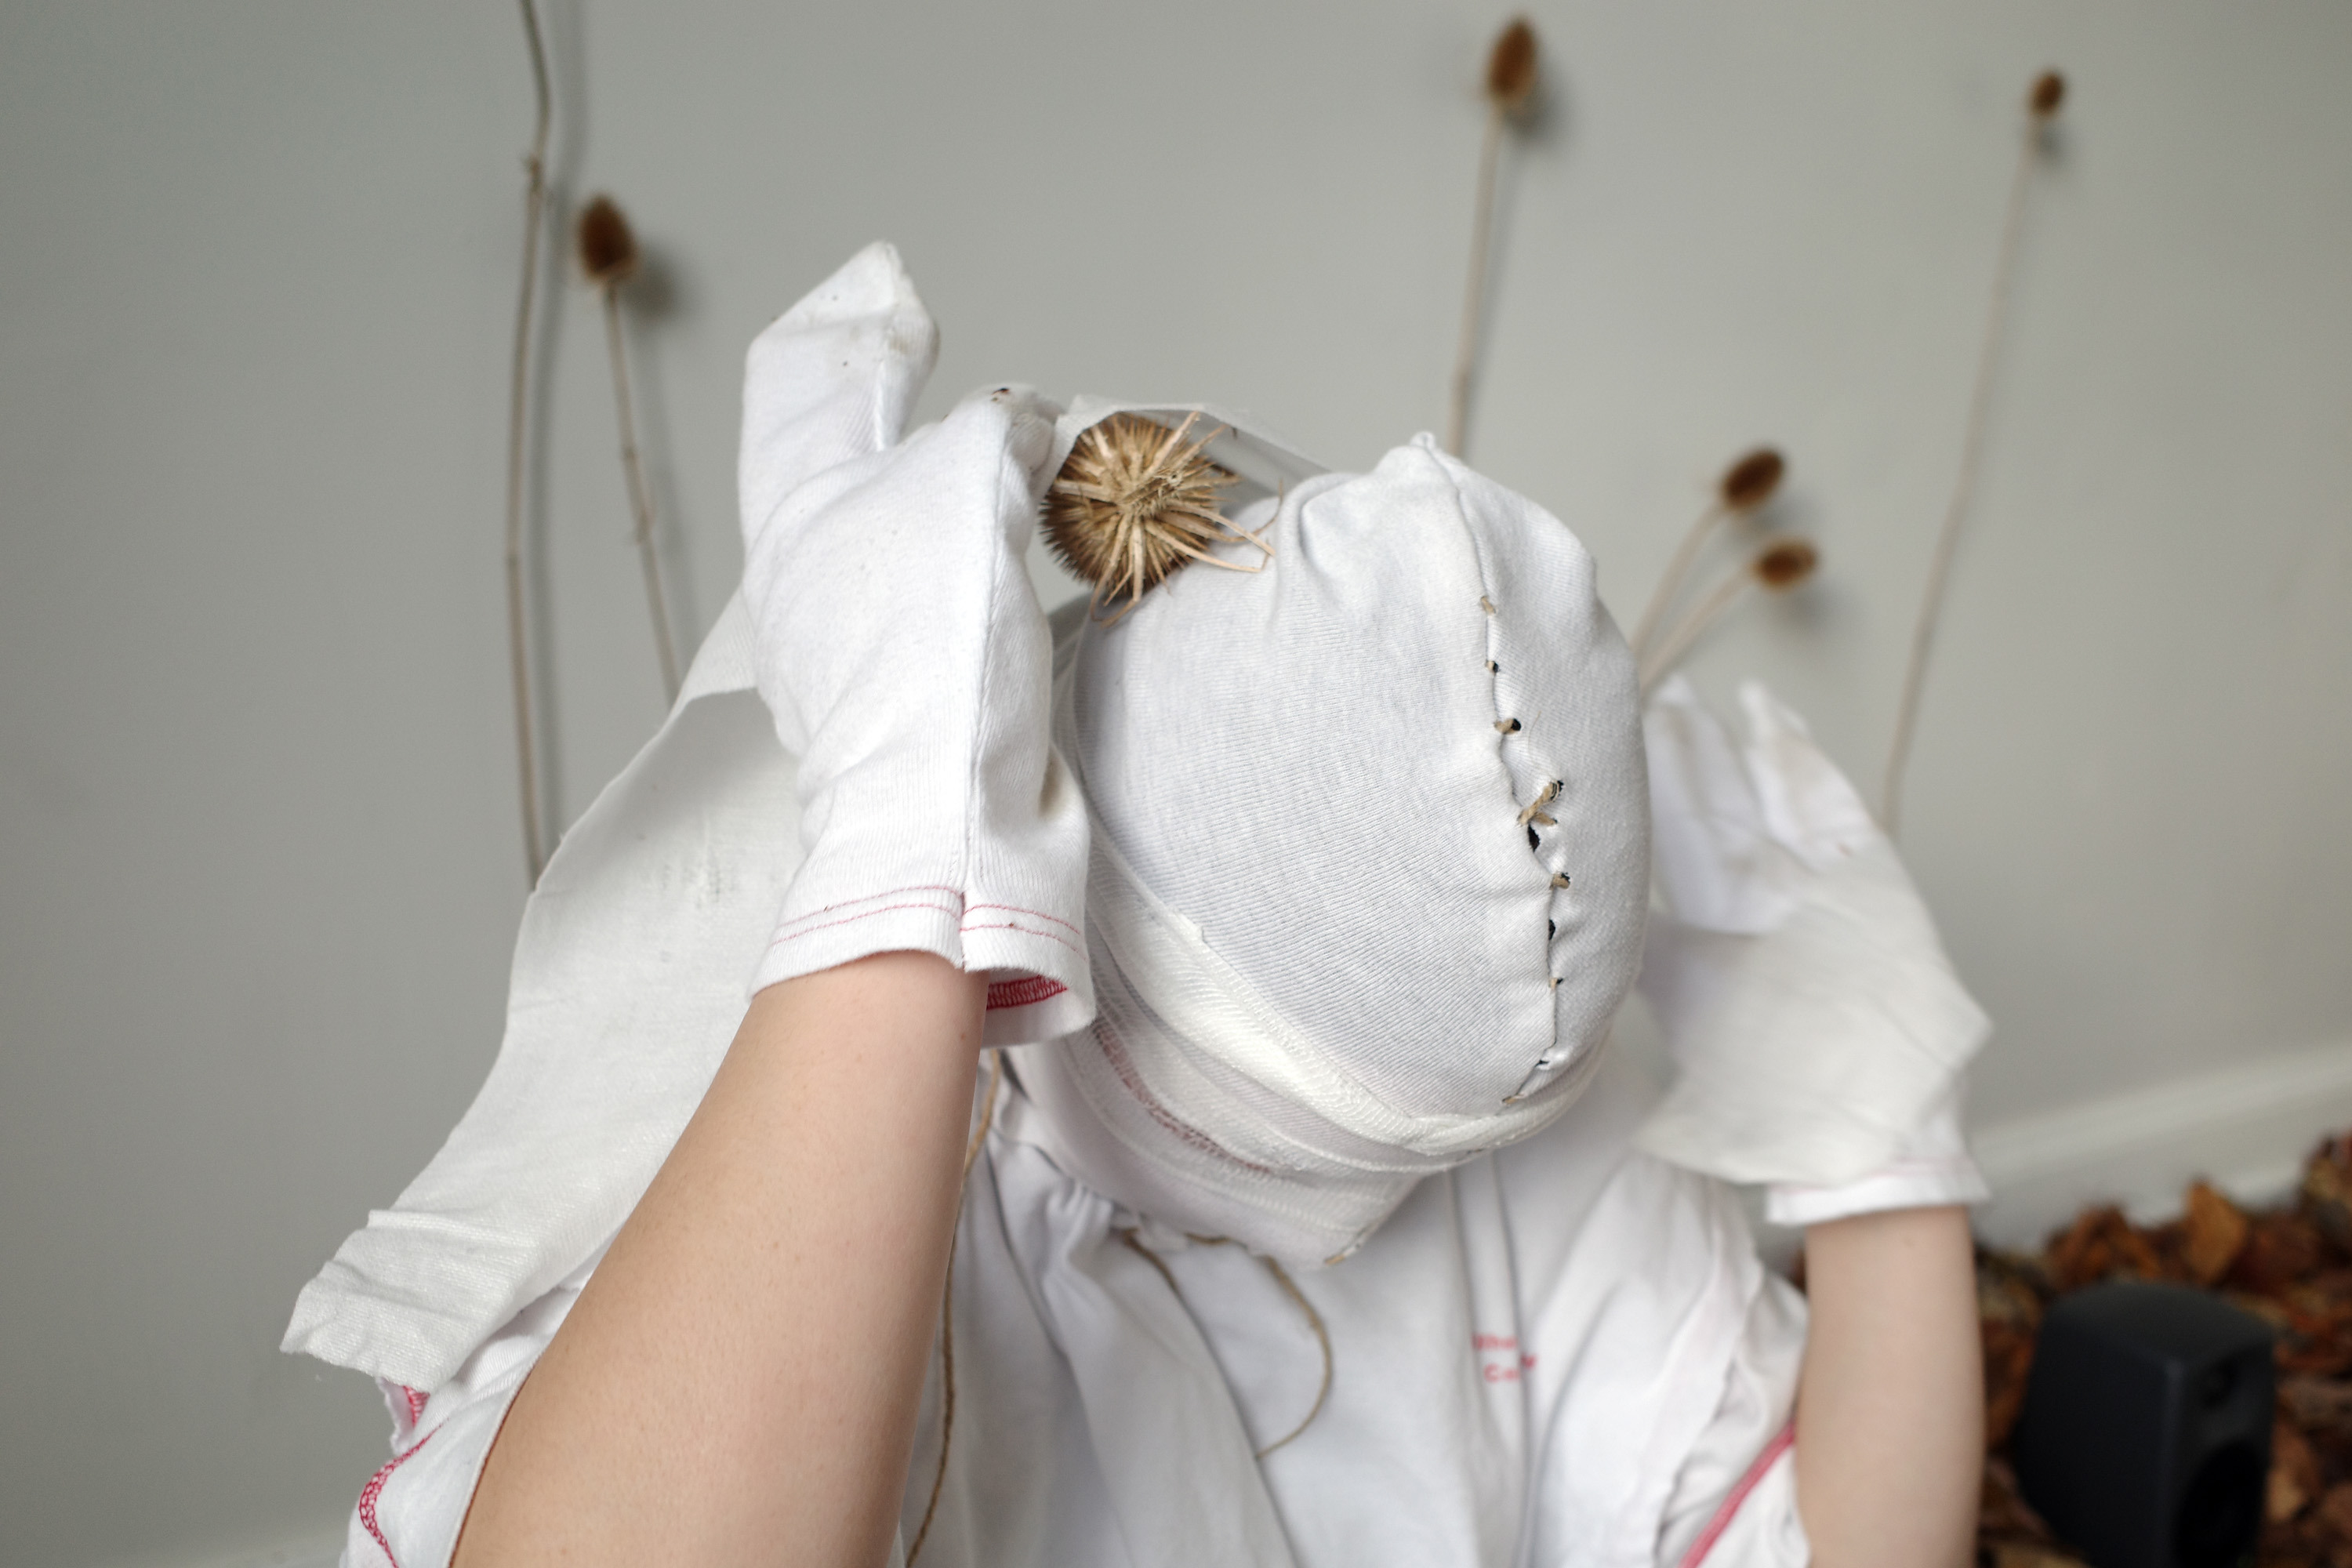 0, 2023, Anders Aarvik, Ayshan Qvortrup, Aske Hvitved. Performance (with Ayshan Qvortrup), installation of unfiltered leafs, teasels (dipsacus) attached with cable clamps, sewn patient clothes, jute, and wooden rodents (carved by Aske Hvitved)